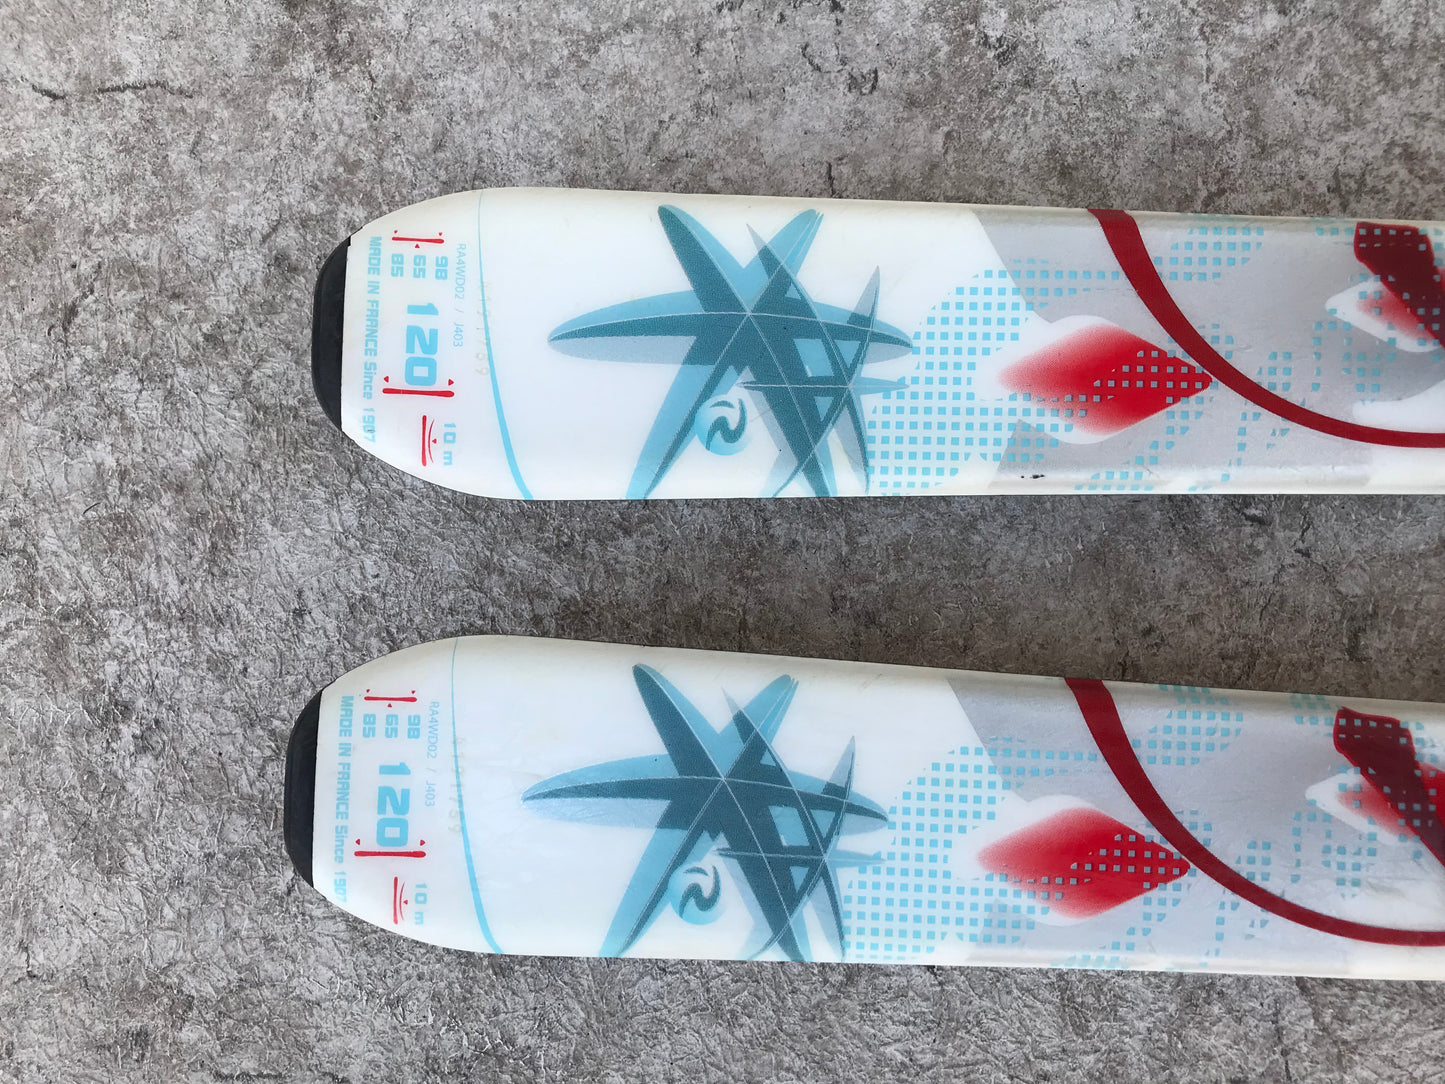 Ski 120 Rossignol Fun Girl Blue Red With Flowers Parabolic With Bindings